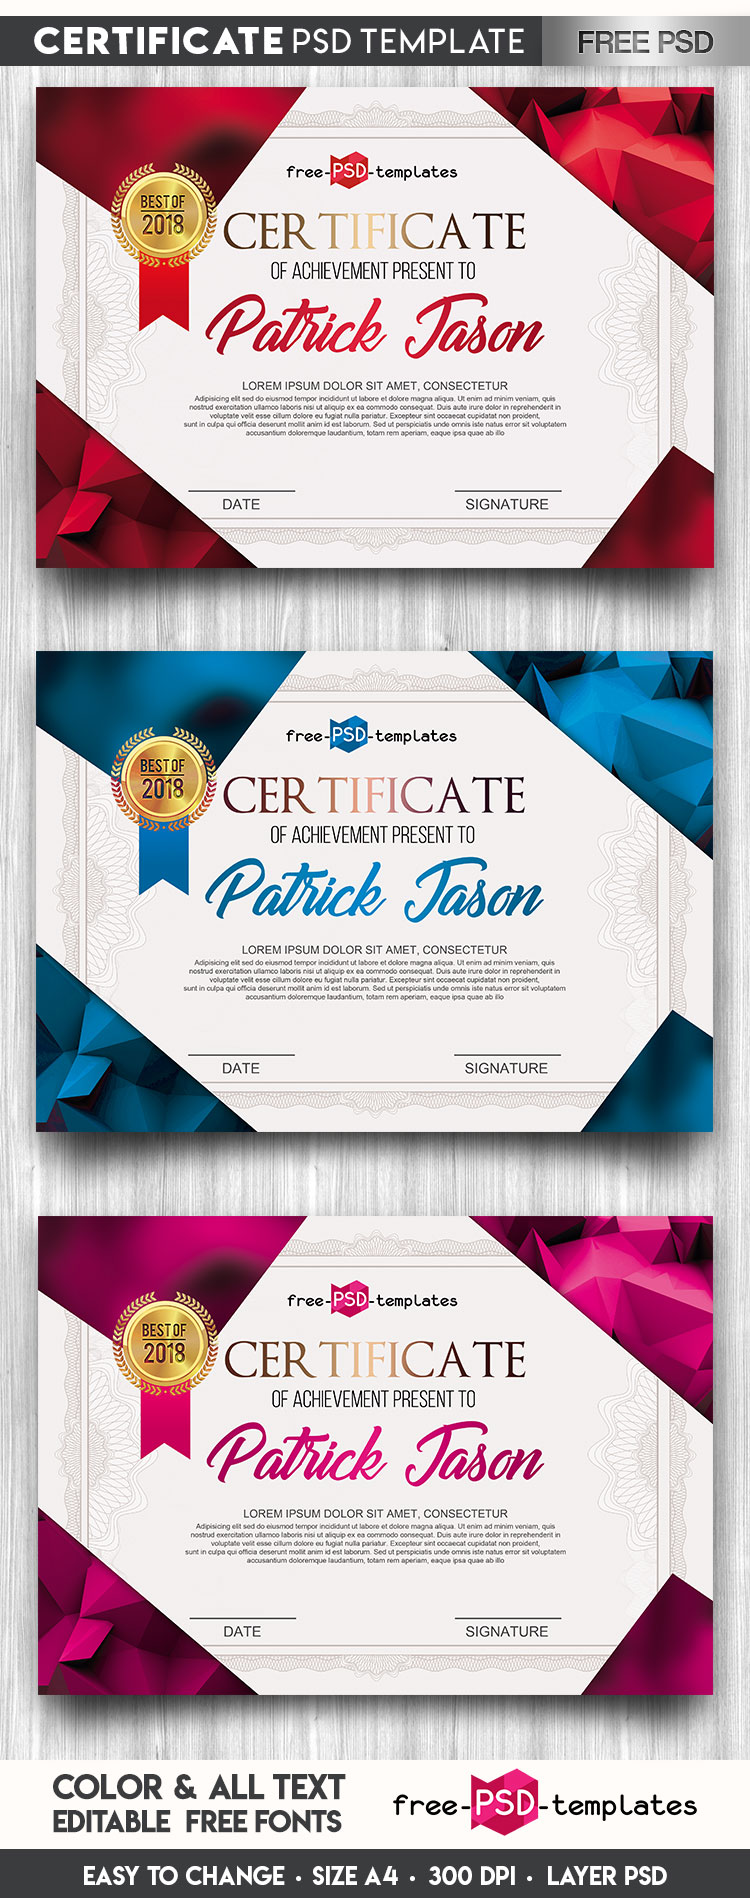 Certificate Design Psd Templates Free Download